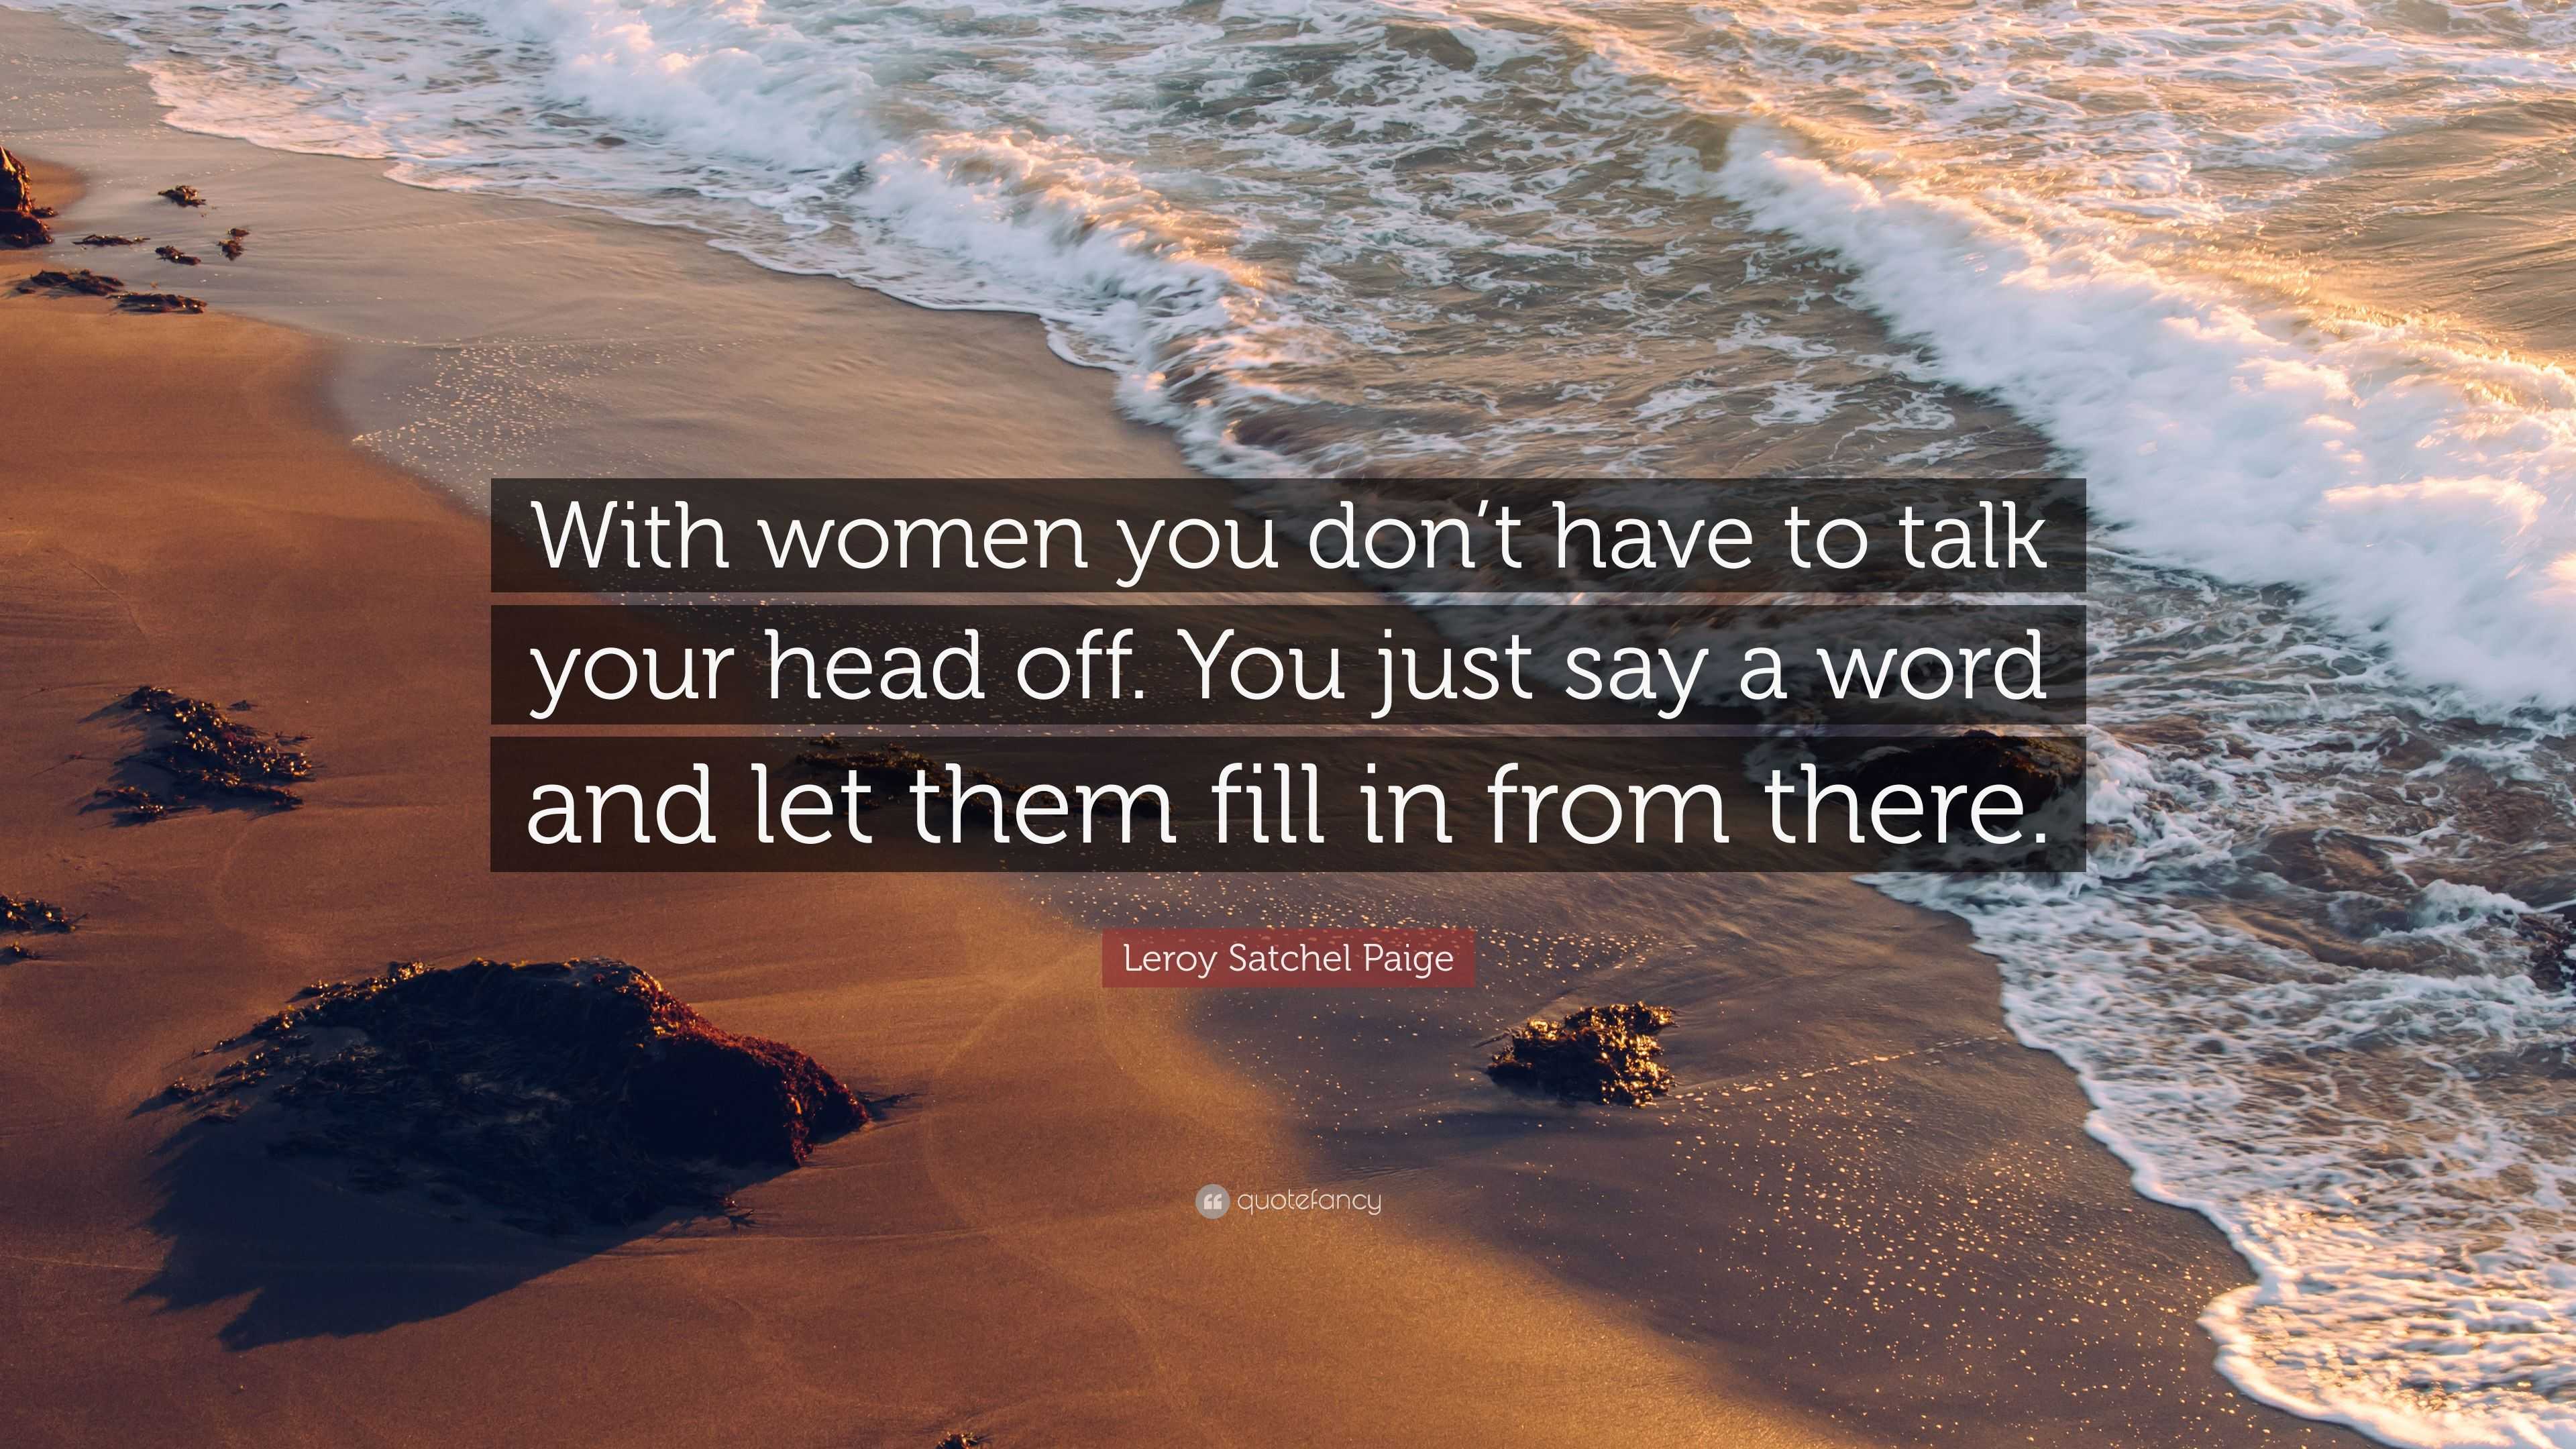 Leroy Satchel Paige Quote: “With women you don’t have to talk your head ...